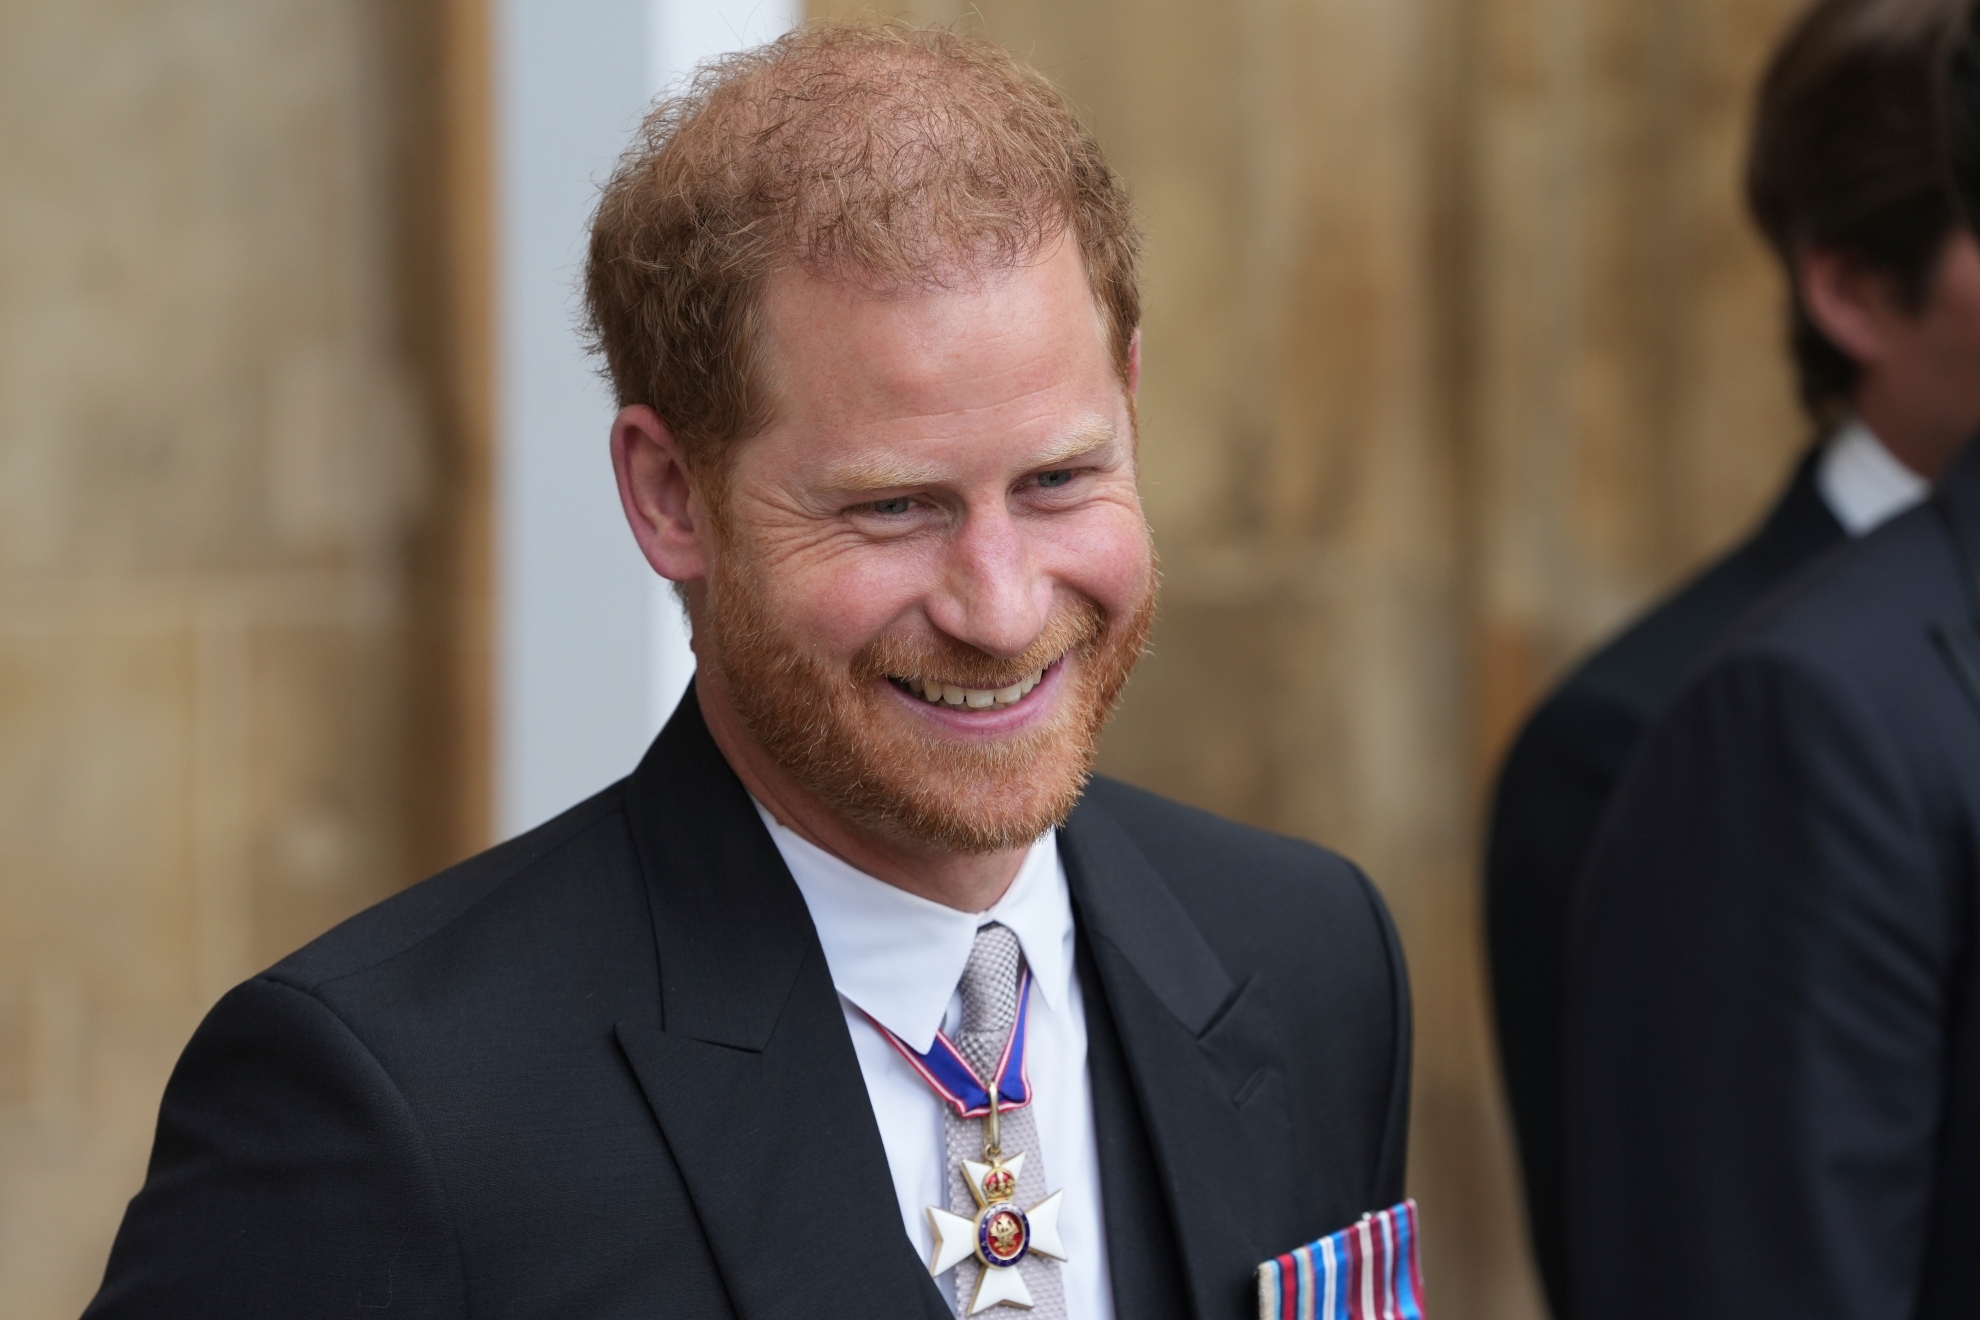 Prince Harry dominates as Americas most beloved Royal, survey finds